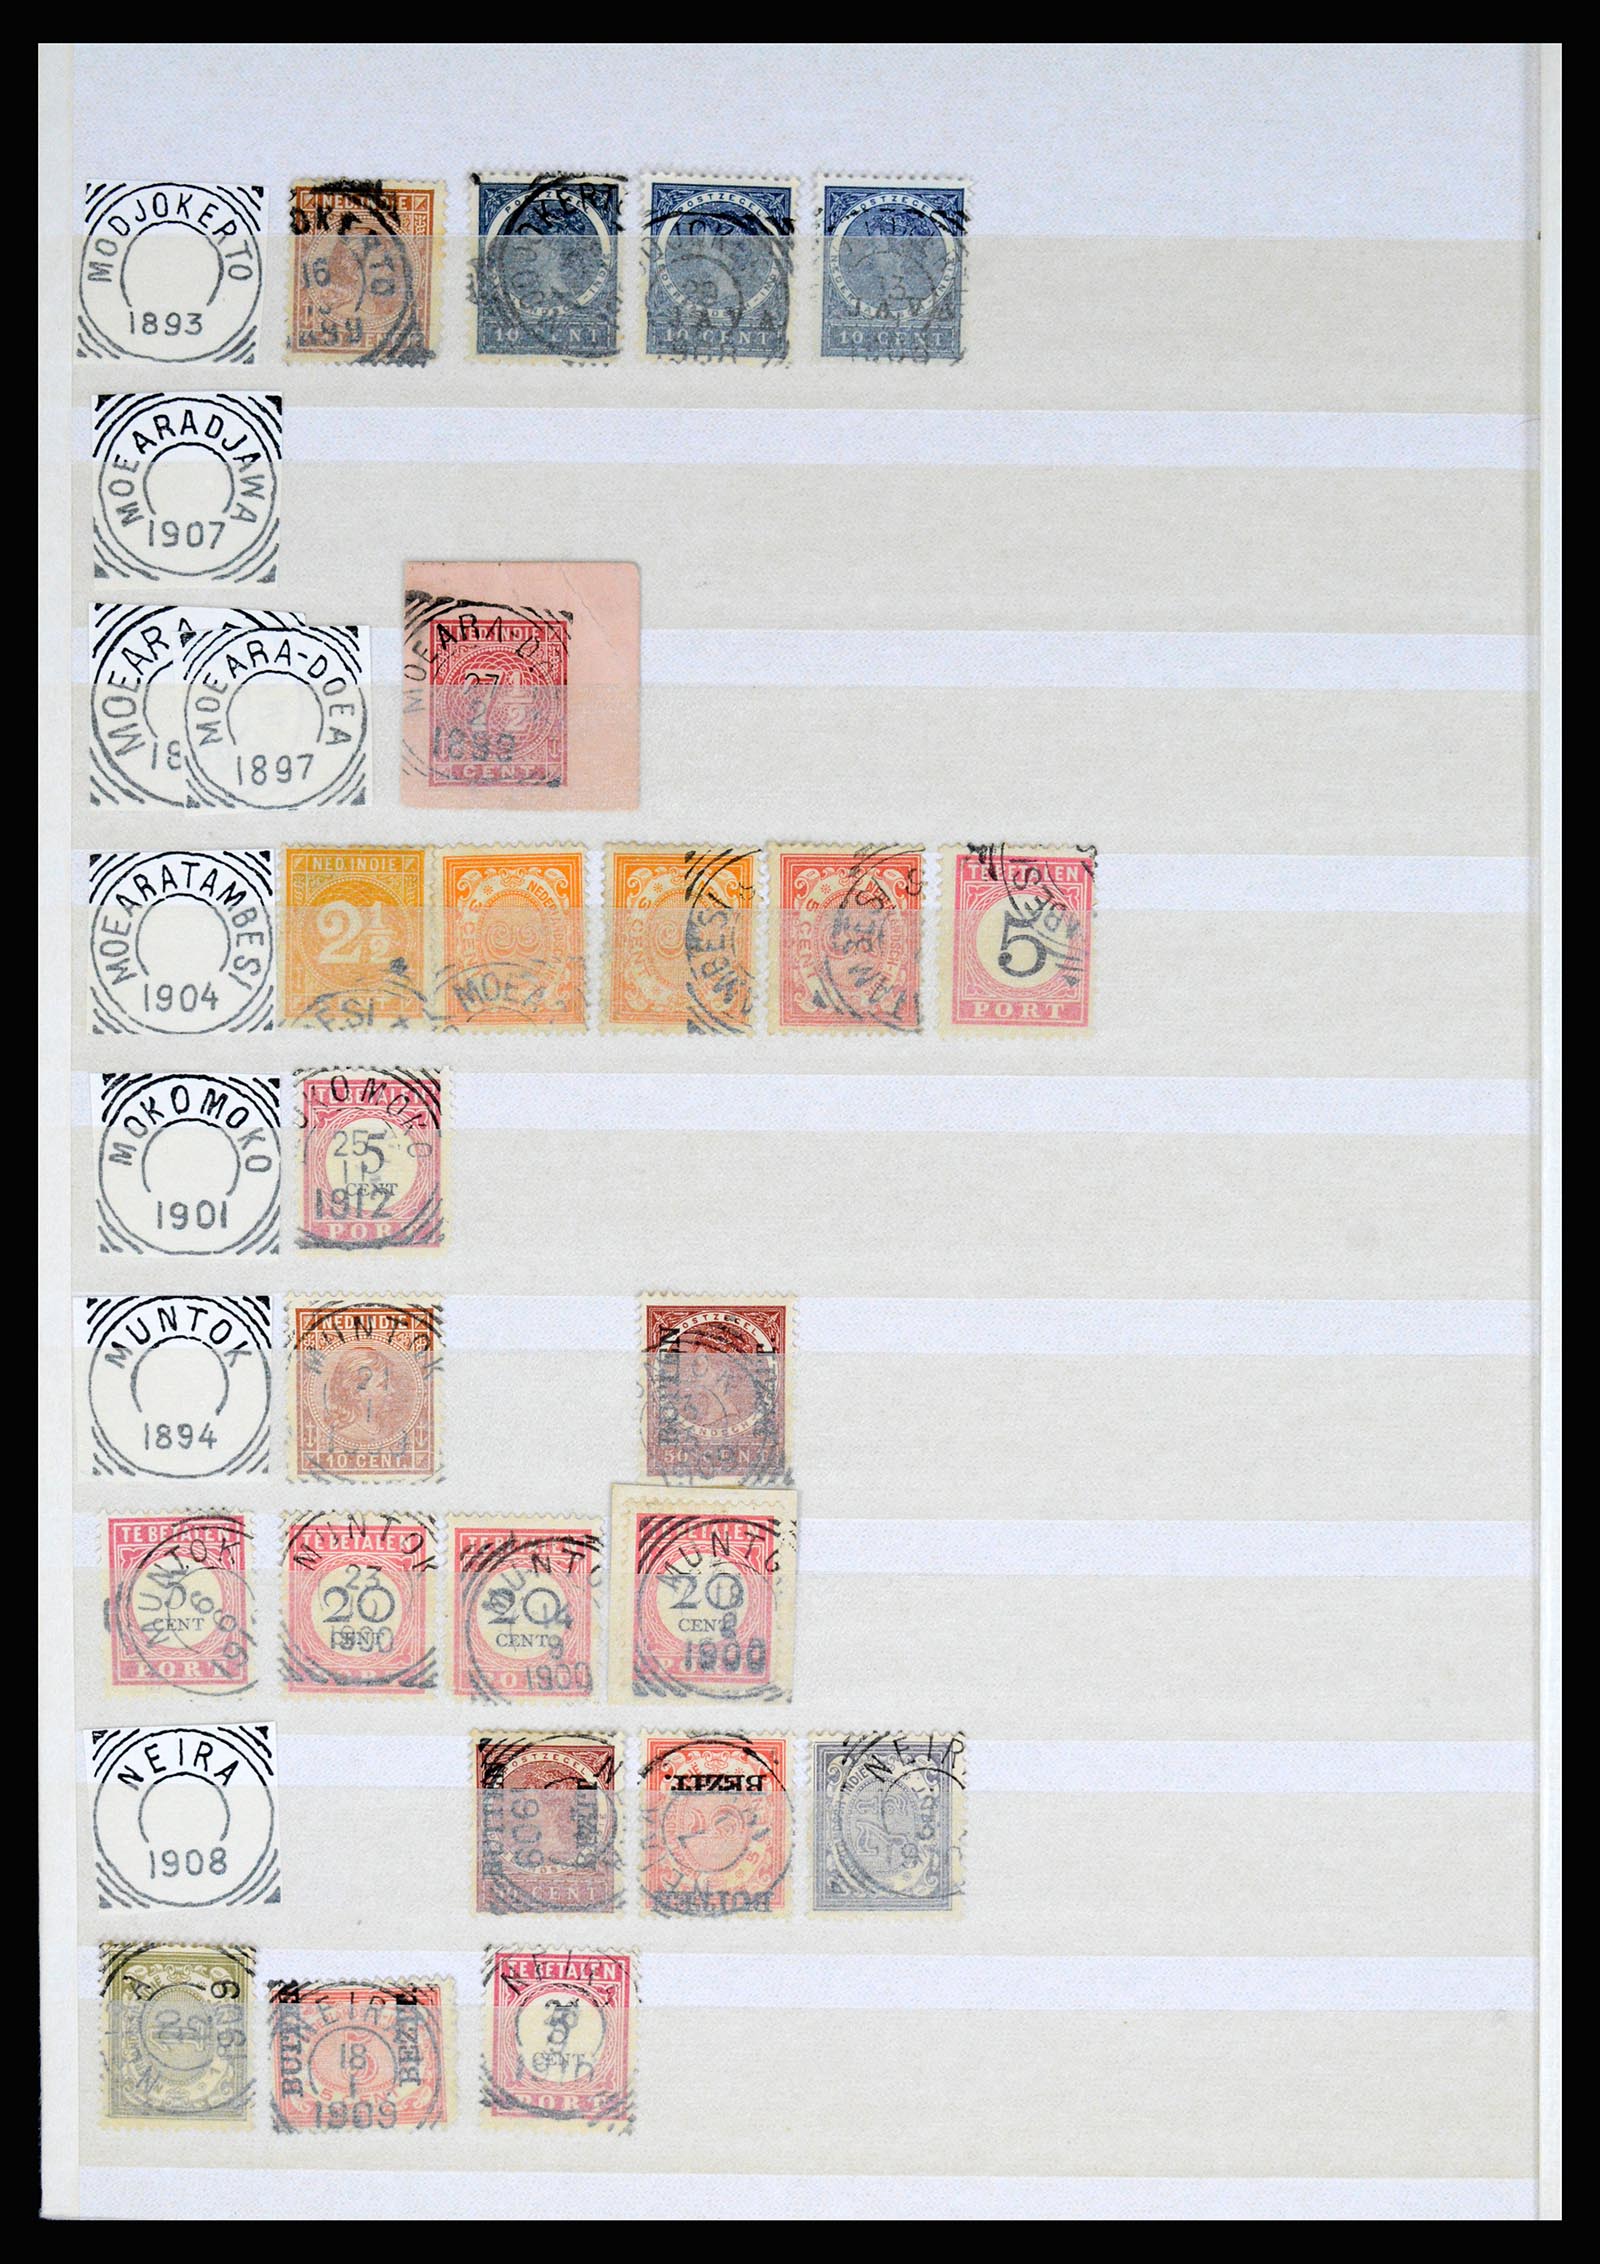 36839 079 - Stamp collection 36839 Dutch east Indies square cancels.